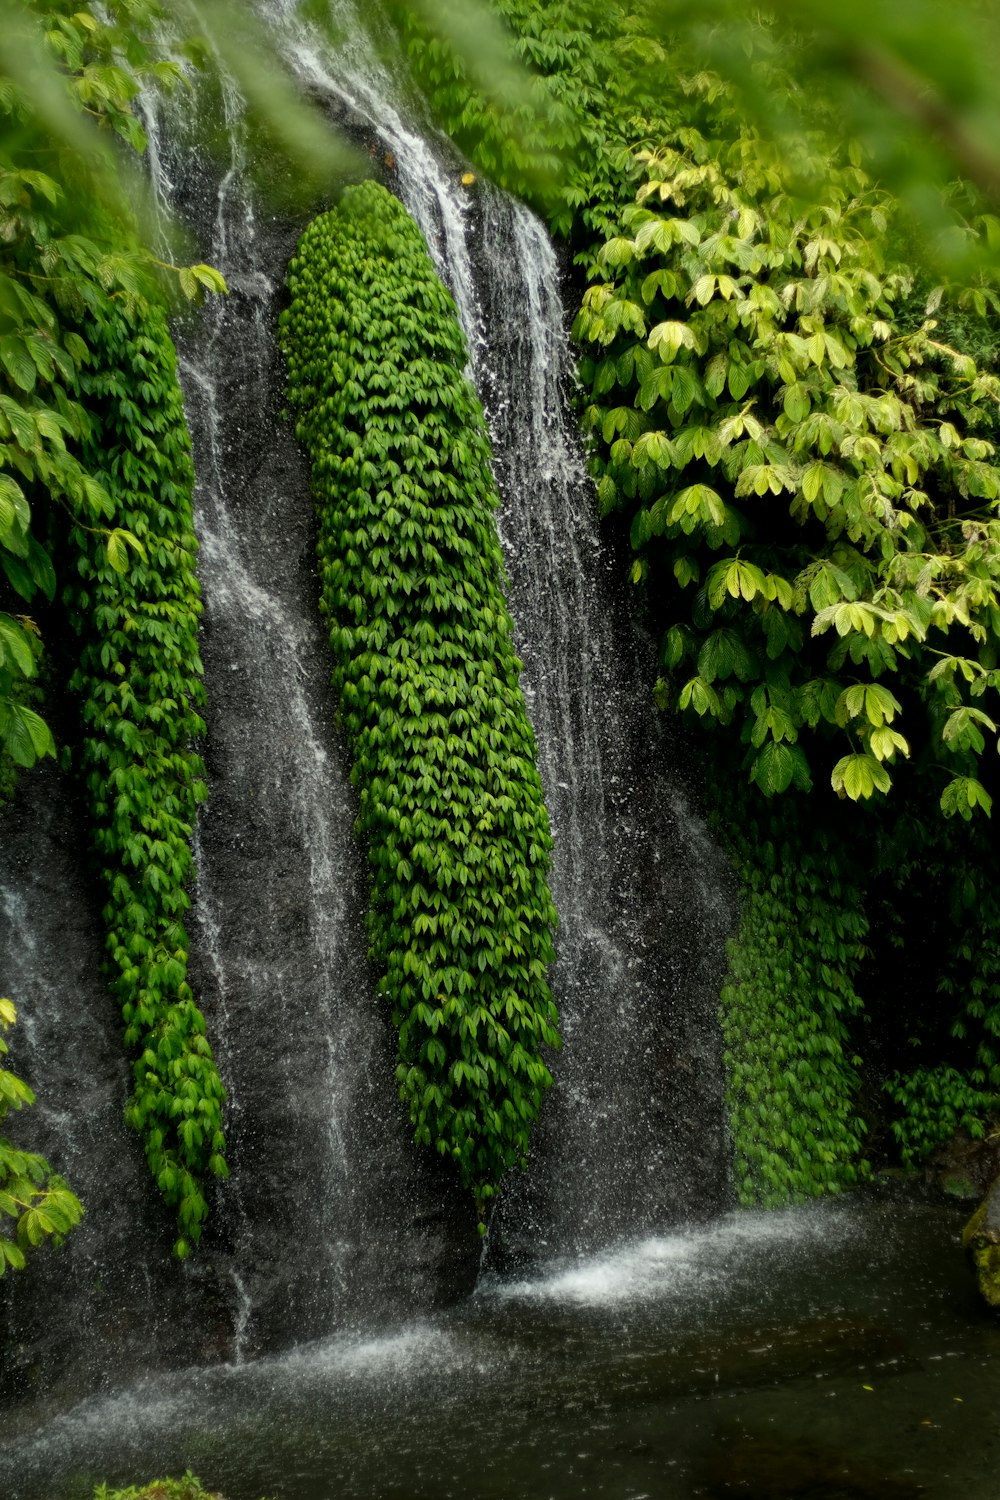 a small waterfall surrounded by lush green foliage